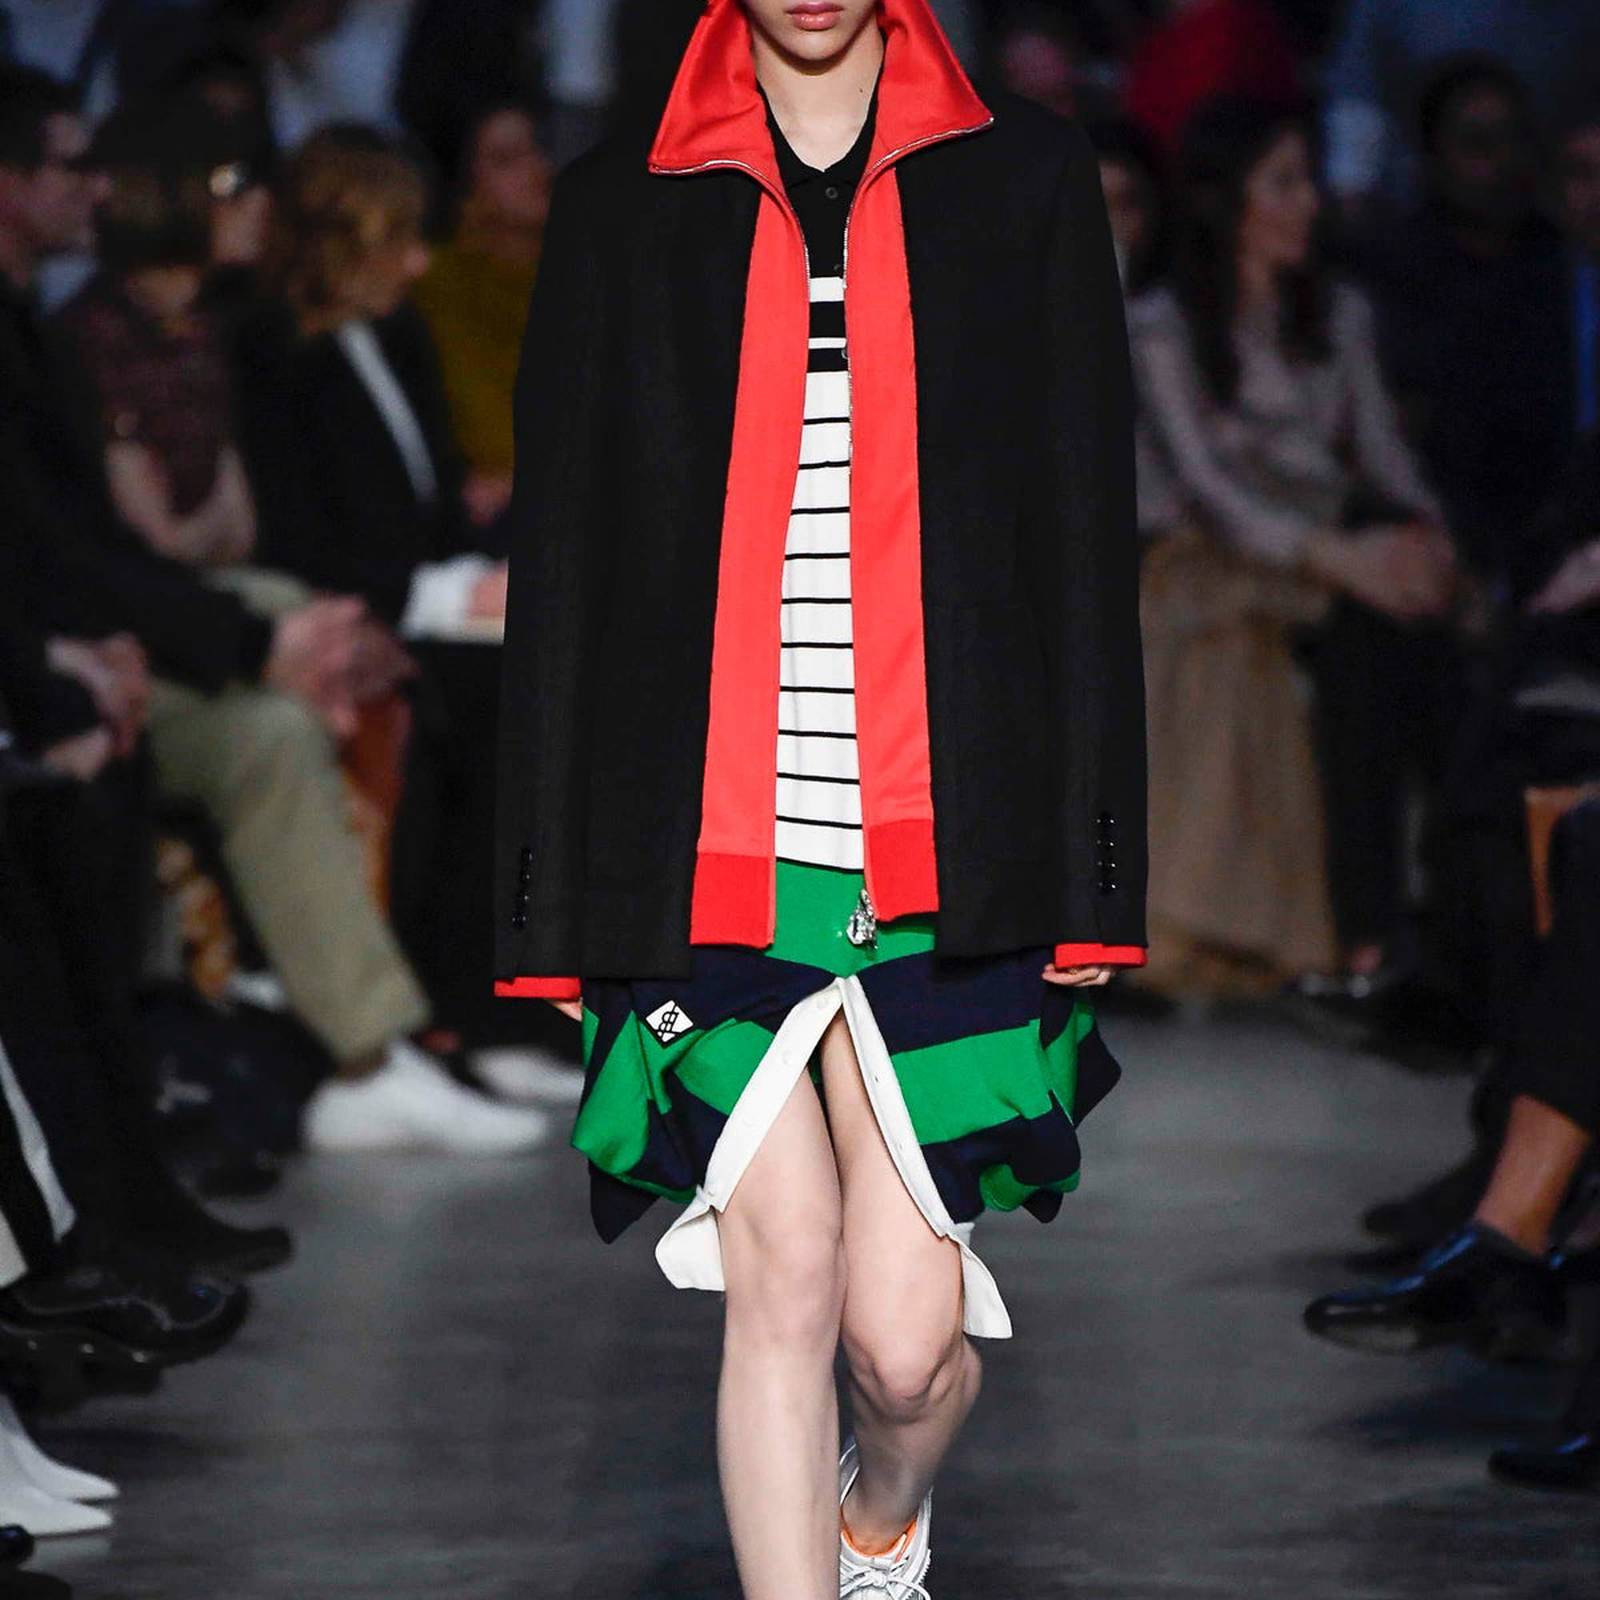 Adult Grudge Melodic Riccardo Tisci Builds His Own World at Burberry | BoF